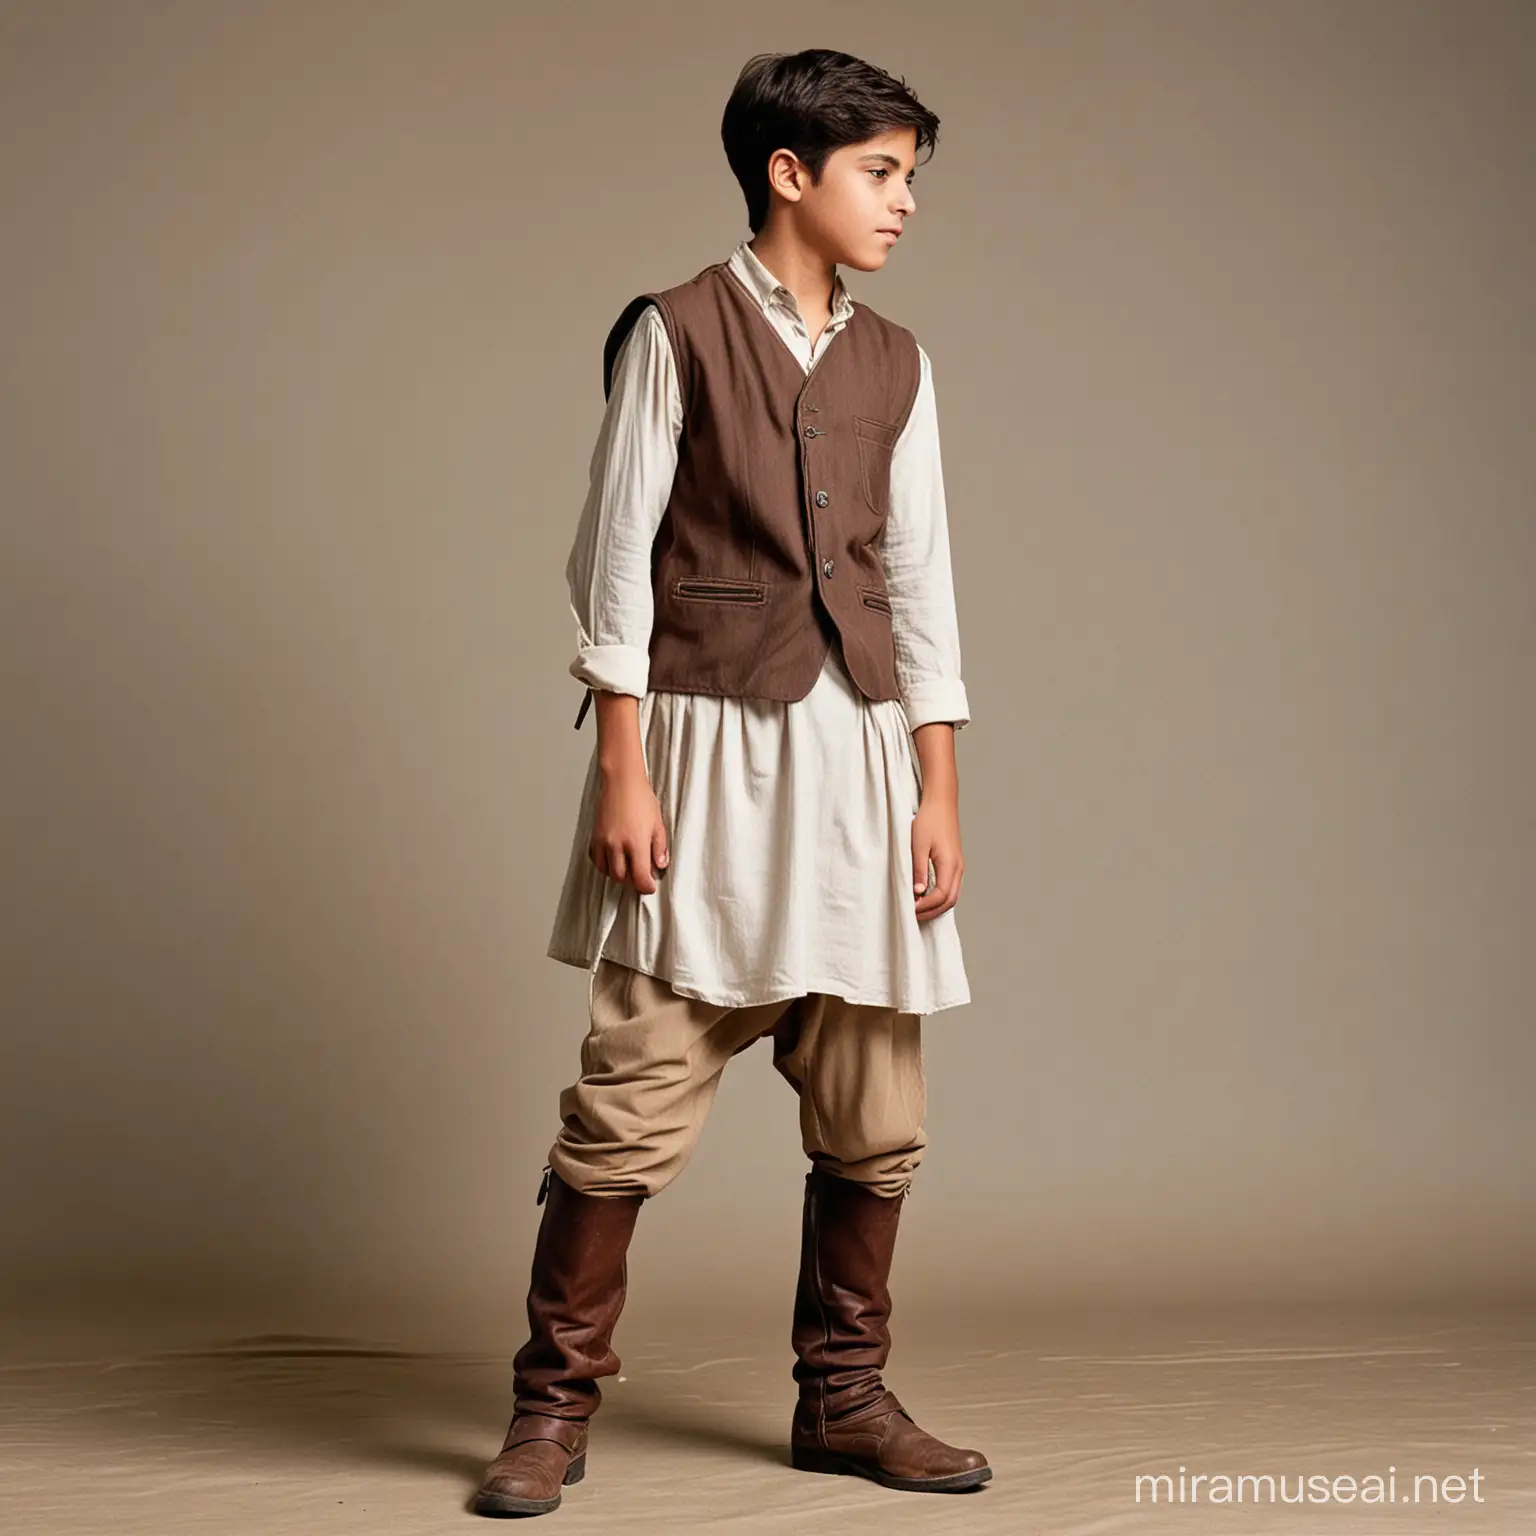 16 years old young boy wearing Tunic, vest, pants, boots & walking in semi side face 